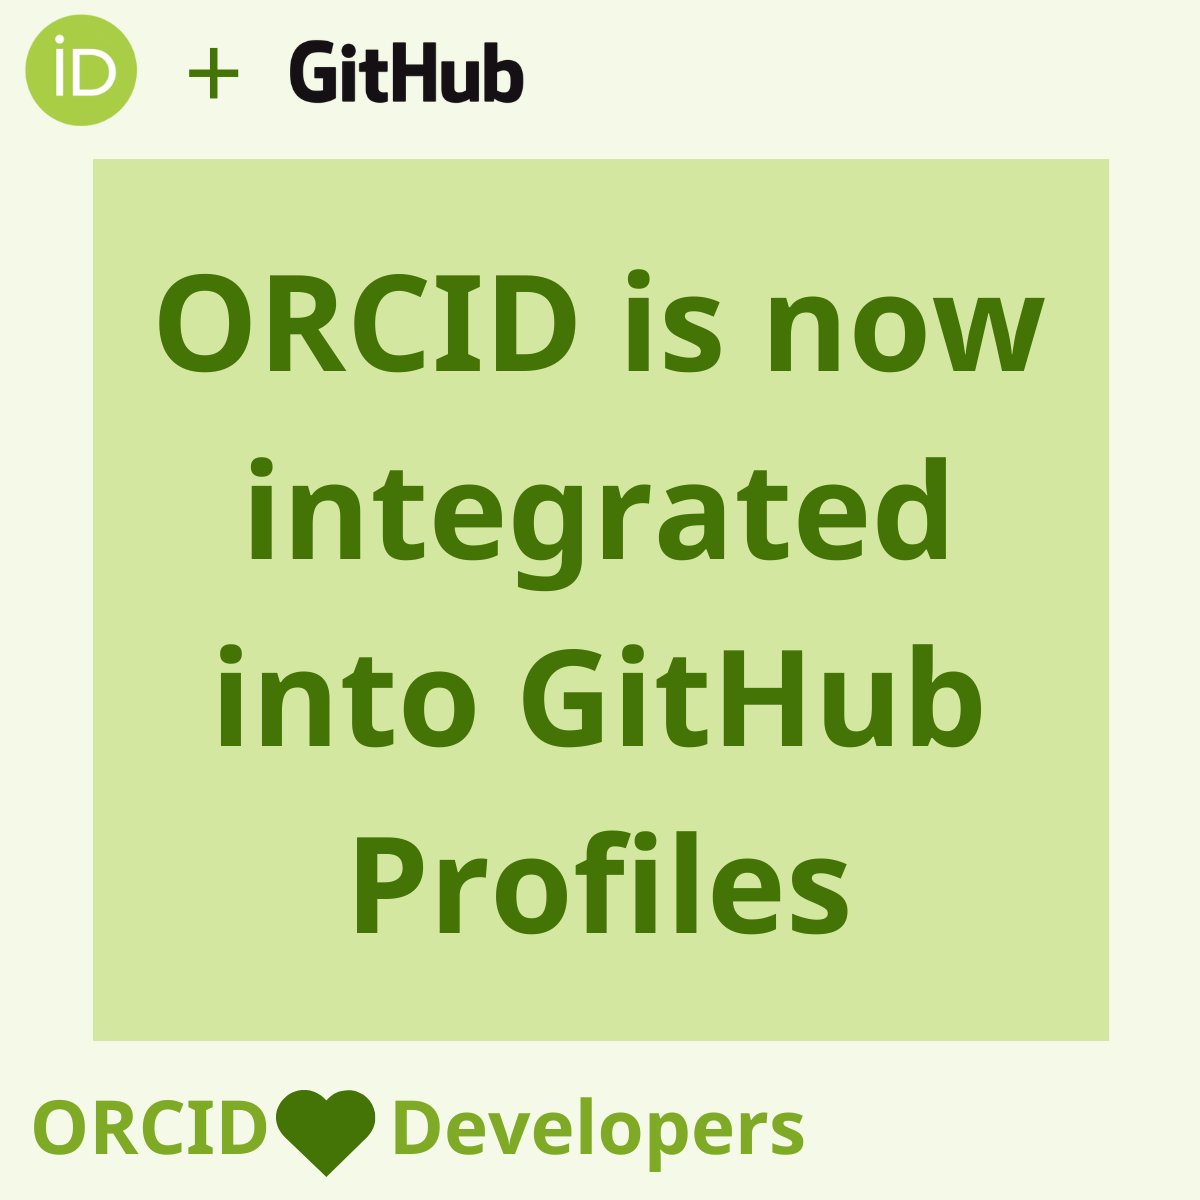 Did you know? ORCID + GitHub are now integrated, which means GitHub users can link their validated ORCID iD to their public GitHub profile. Read more and get your GitHub profiled linked with ORCID today! bit.ly/3vlQe49